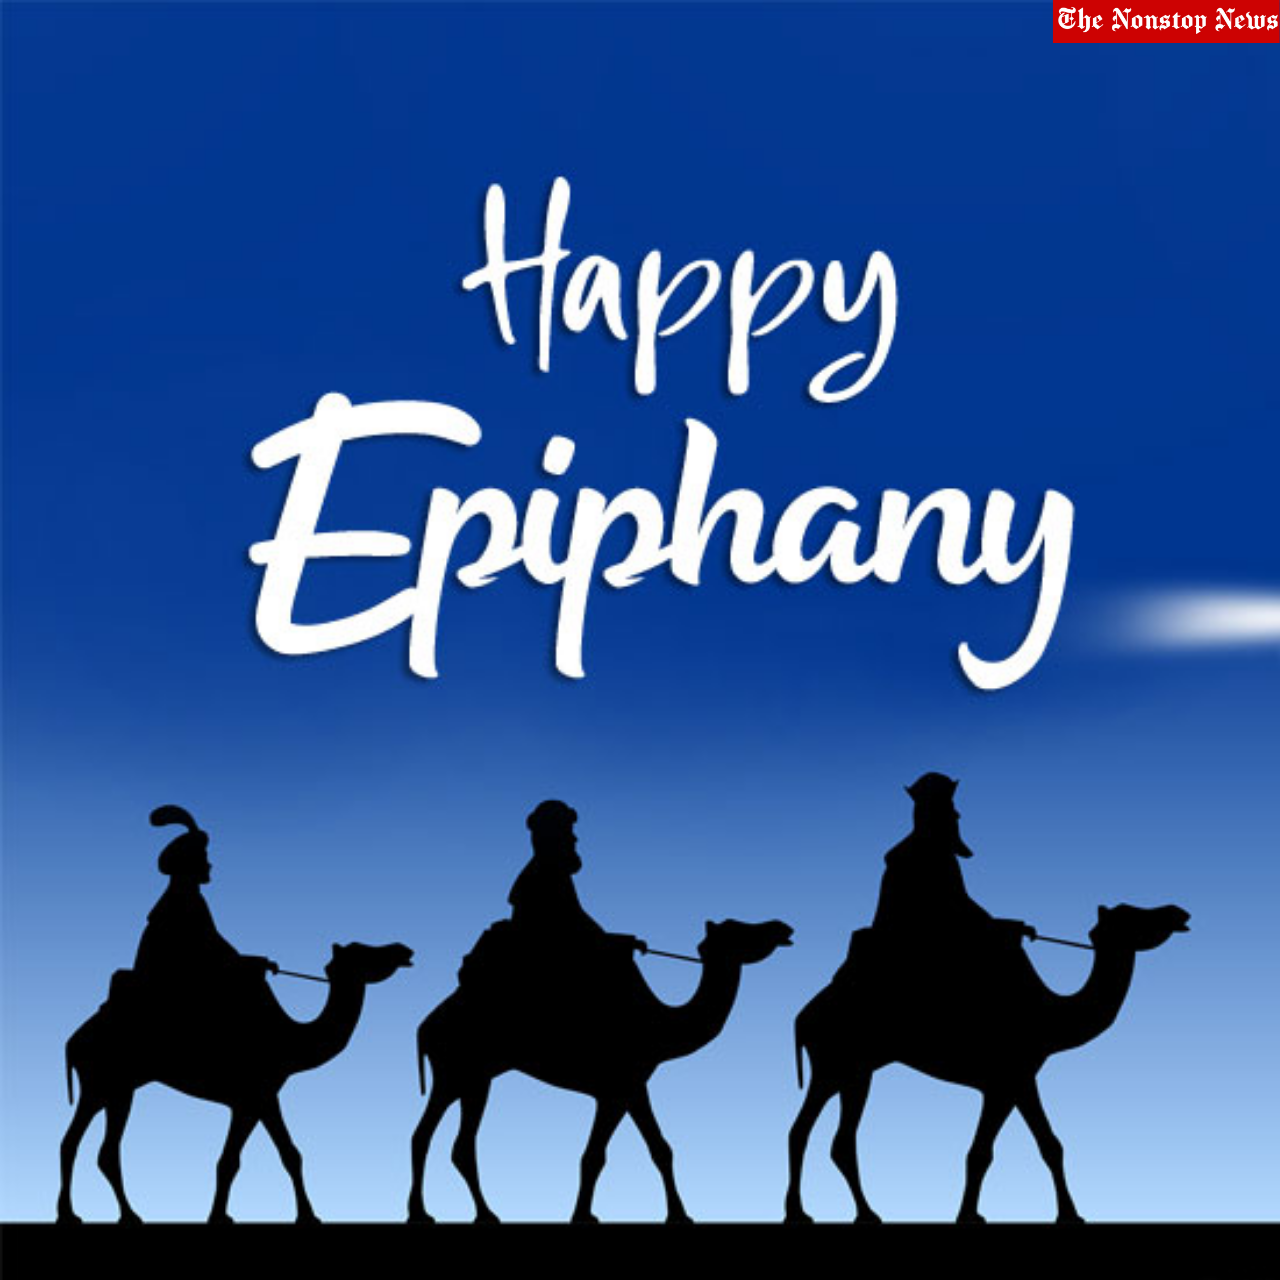 Epiphany Day 2022 Instagram Captions, Facebook Messages, Twitter Images, Posters to share